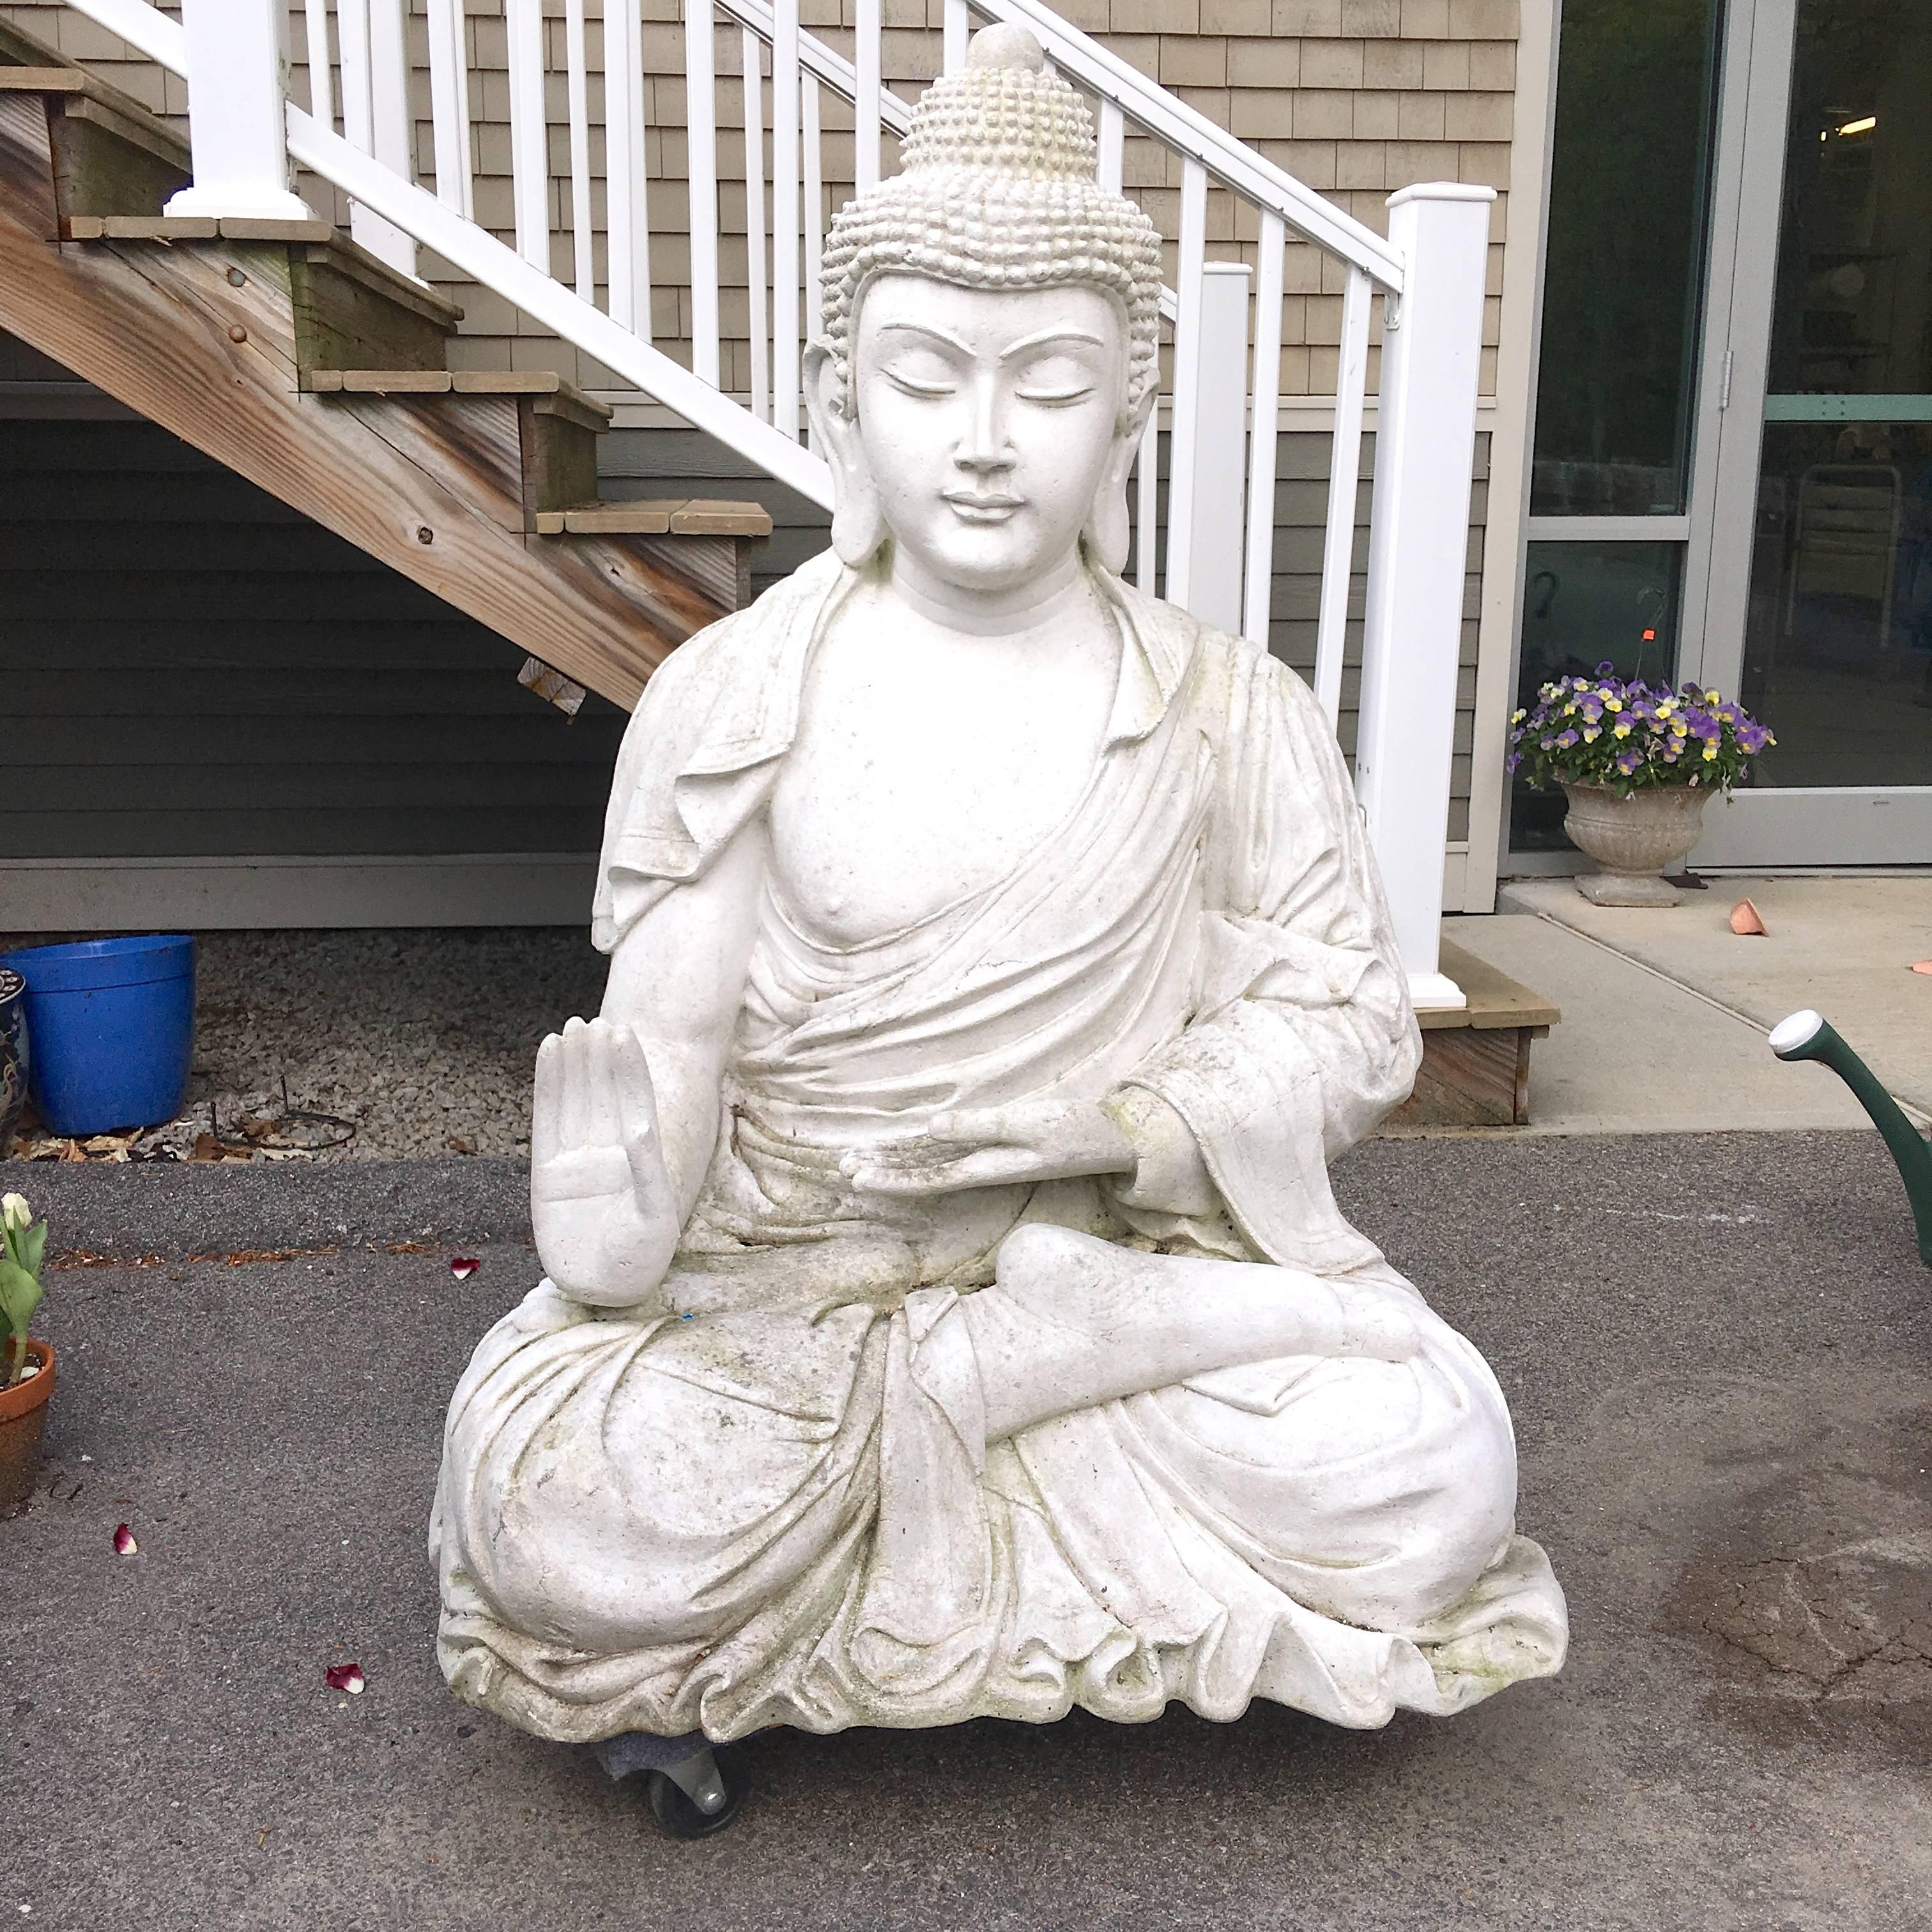 SATURDAY SALE (AUG 2018)

Life-sized figure of Shakyamuni Buddha seated in lotus position with raised right hand. This is a vintage garden statue for outdoor (or indoor) use. Composition is fiberglass and coated with a chalky white plaster resin